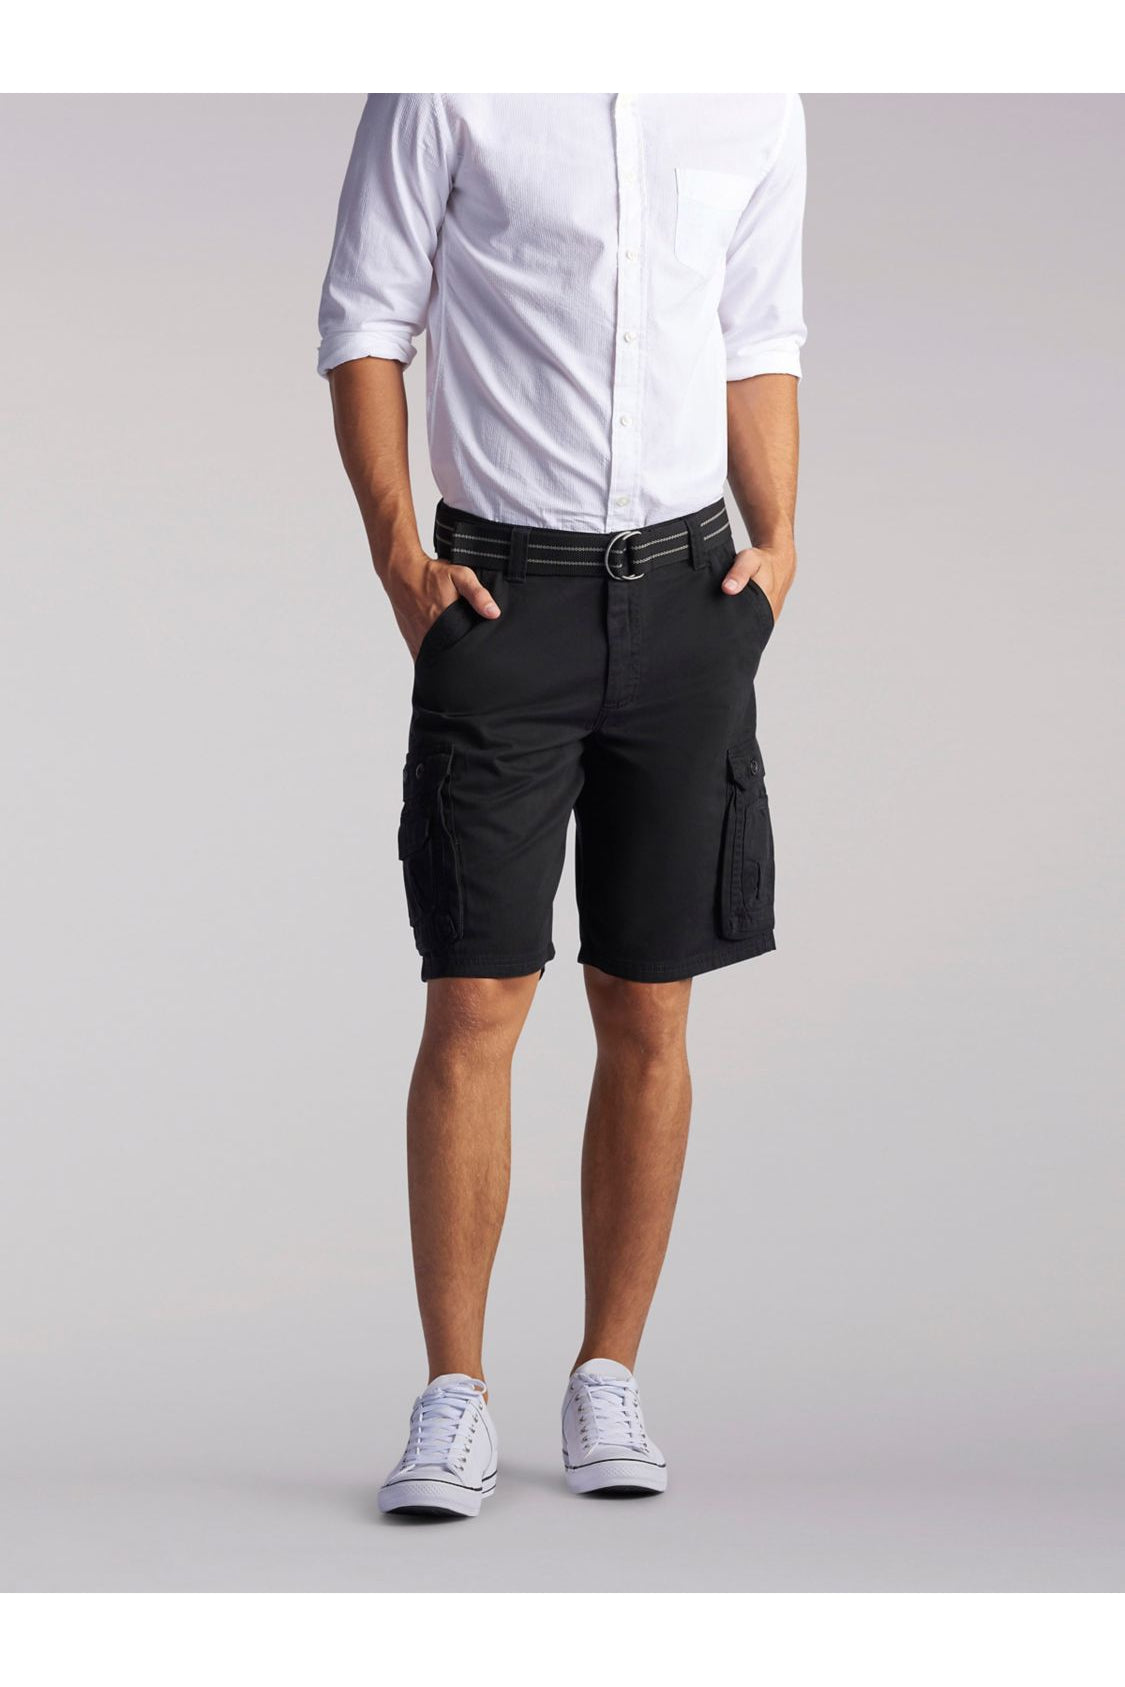 Big and Tall Wyoming Cargo Short in Black from Front View